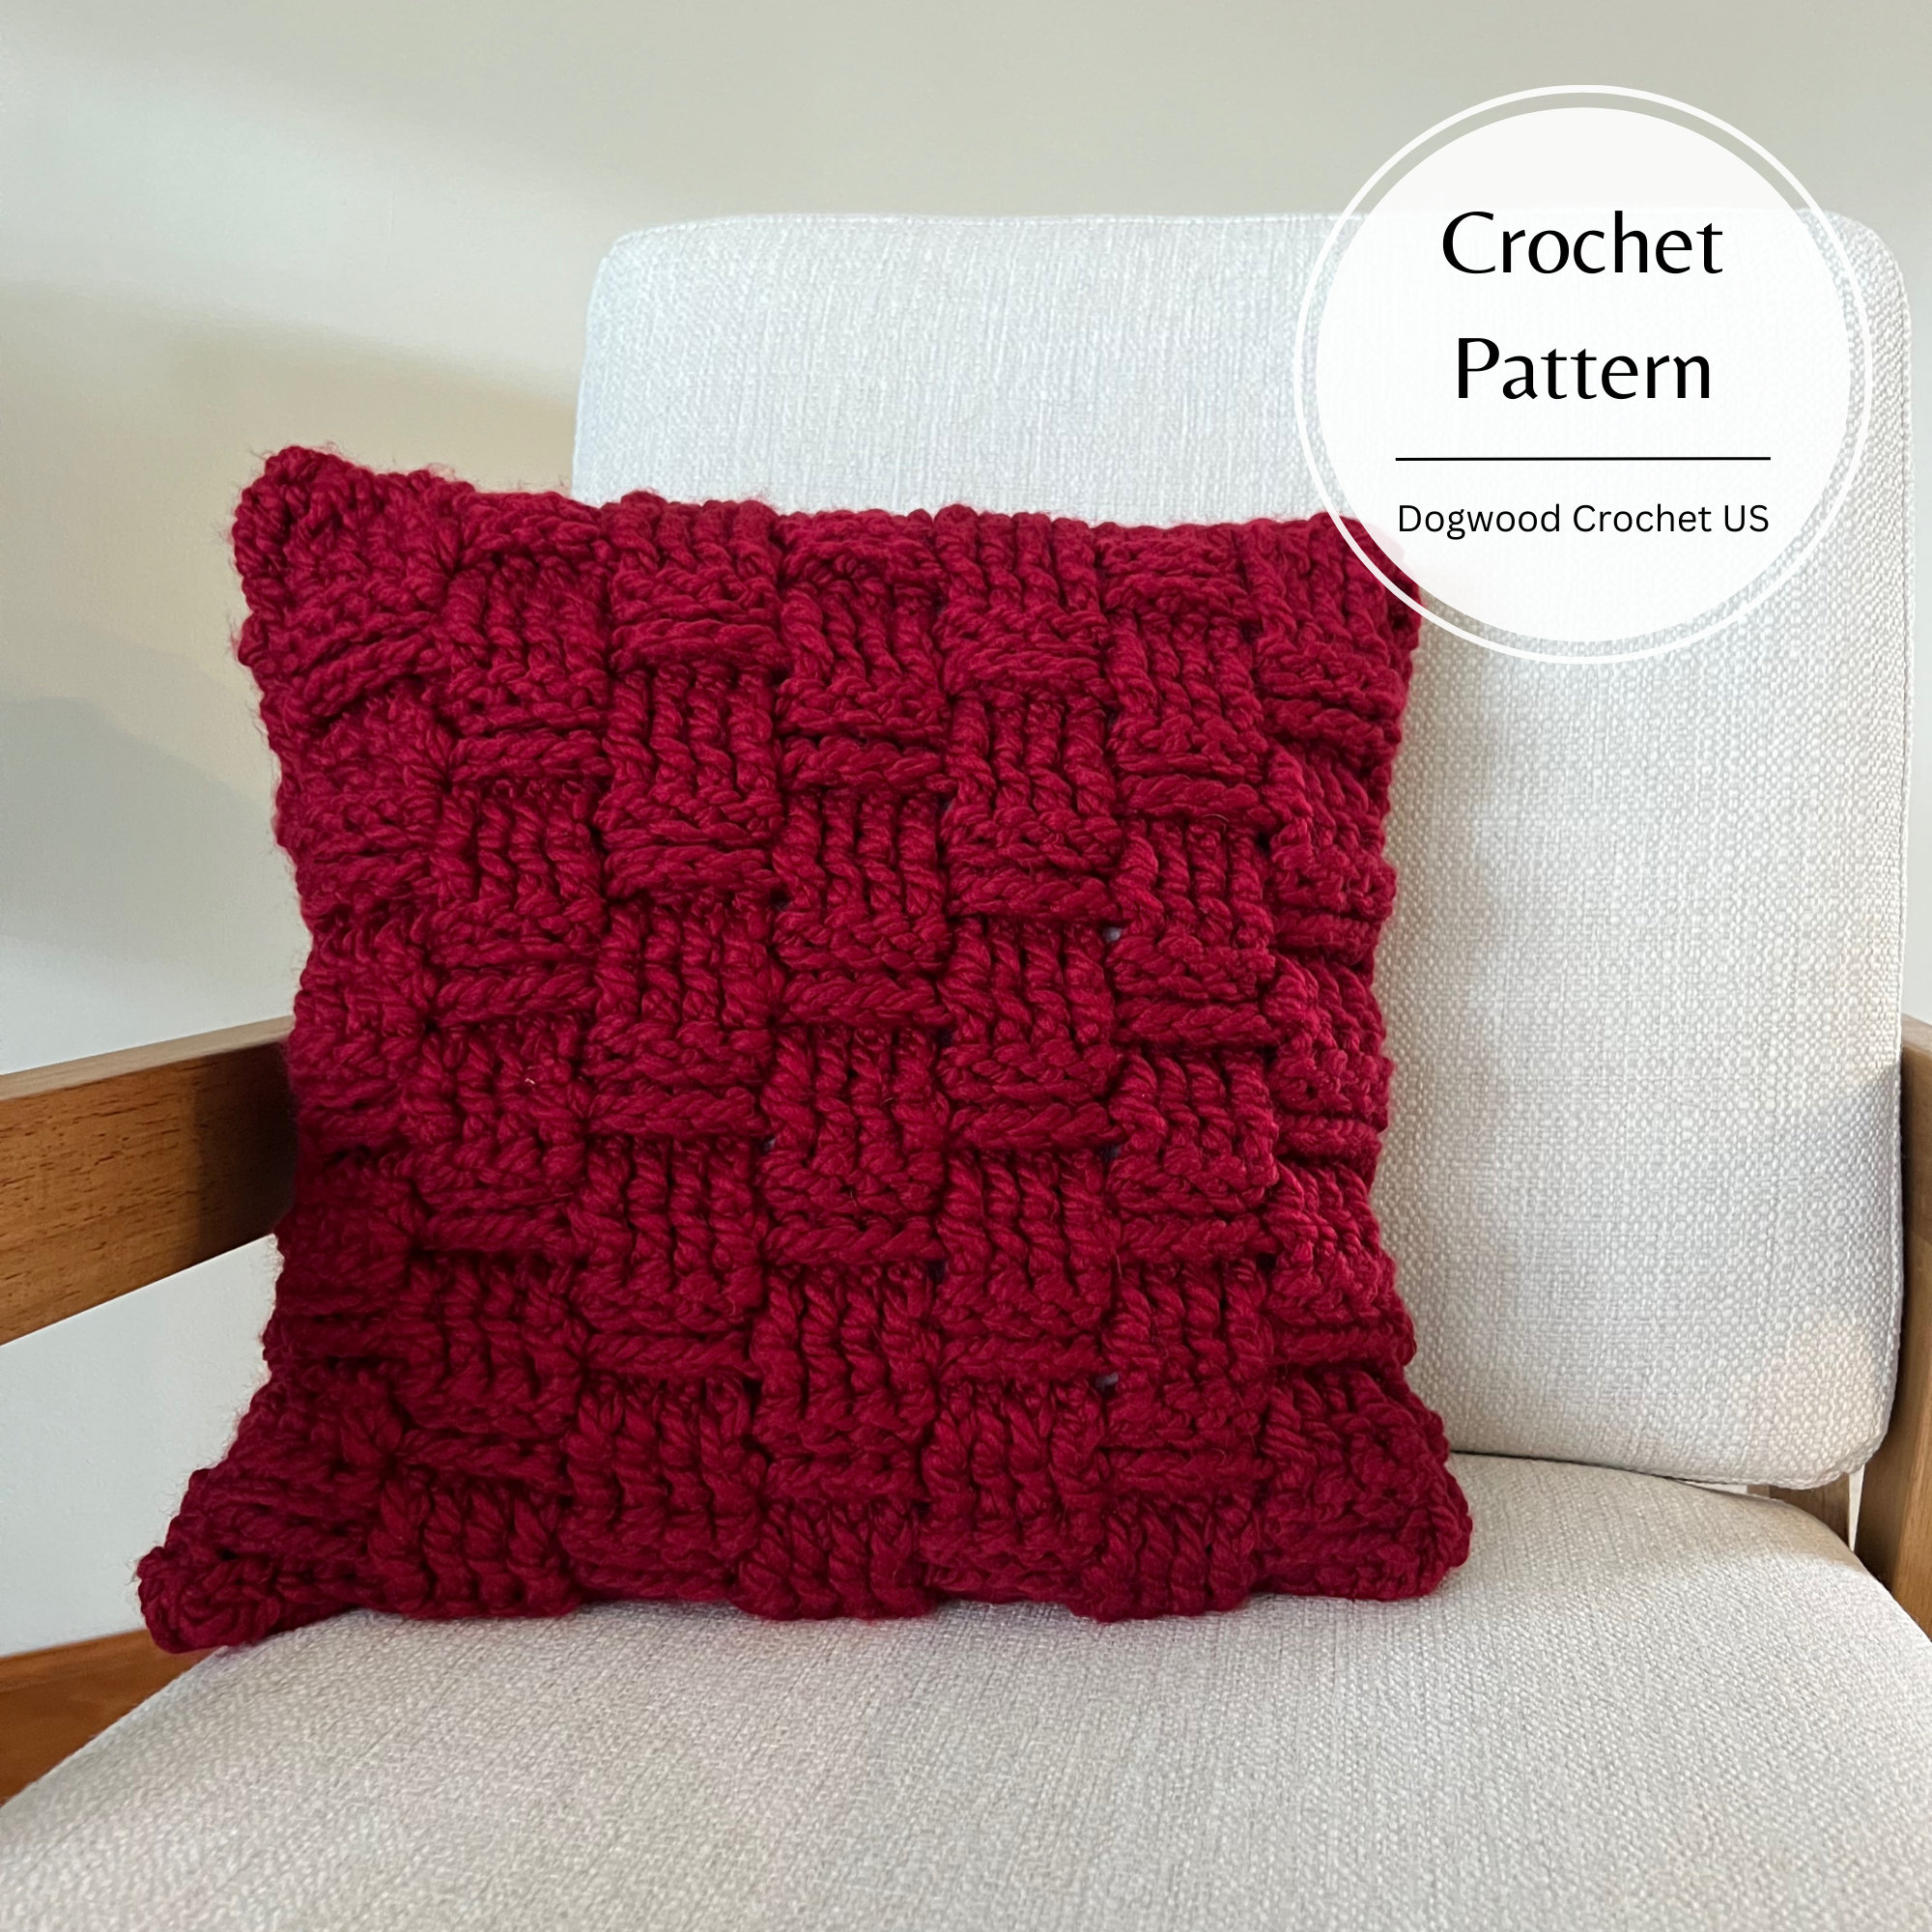 Crochet Pillow Covers That Fit and Function